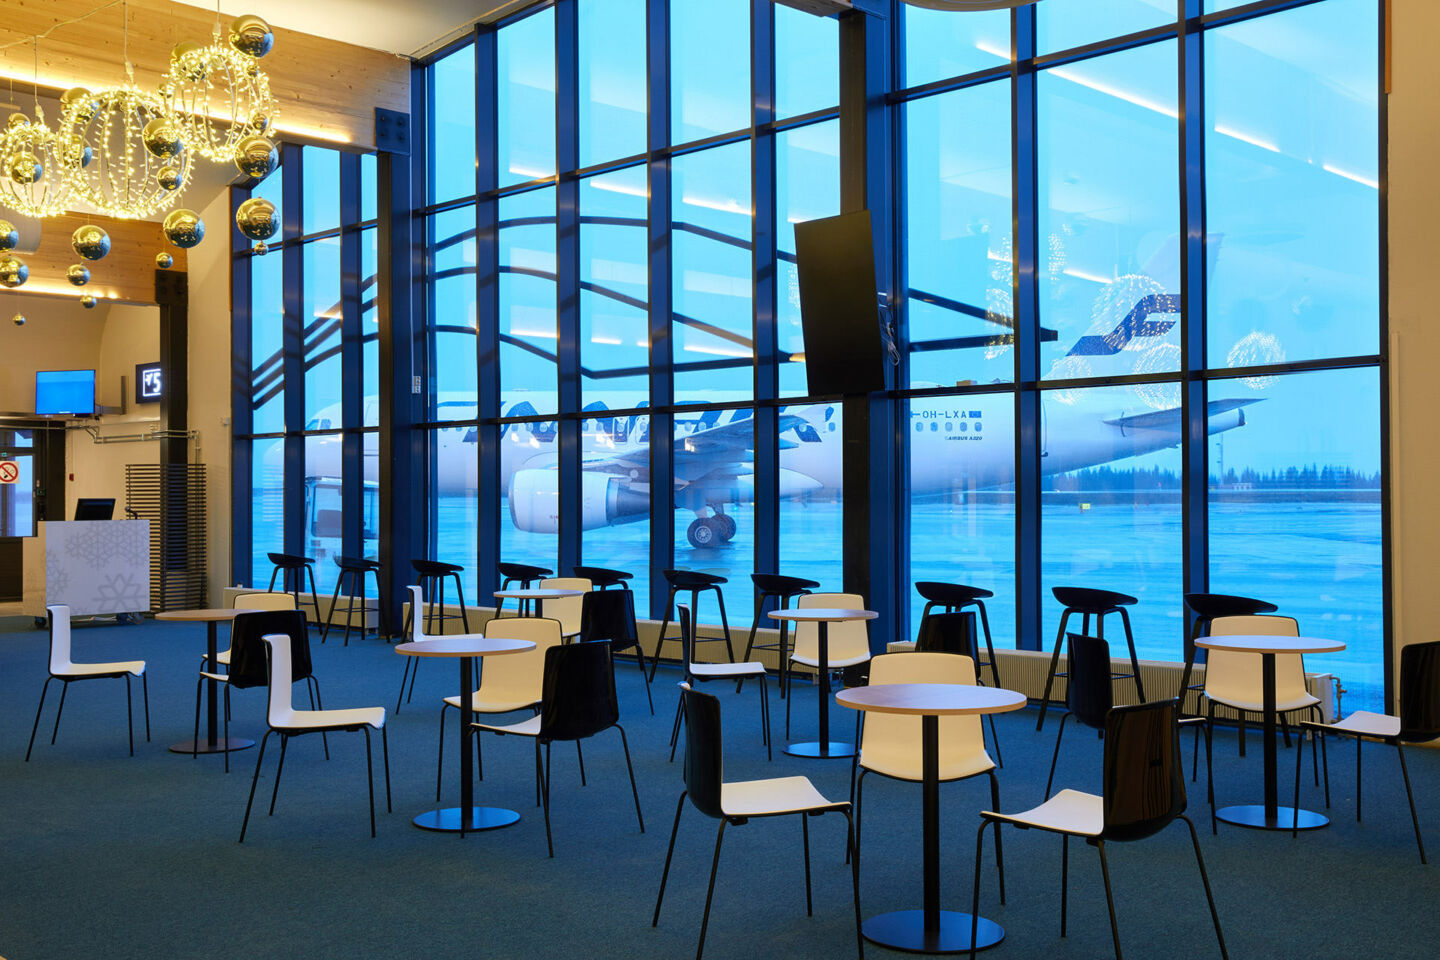 Inside the Kittilä Arctic Airport, a filming location in Finnish Lapland